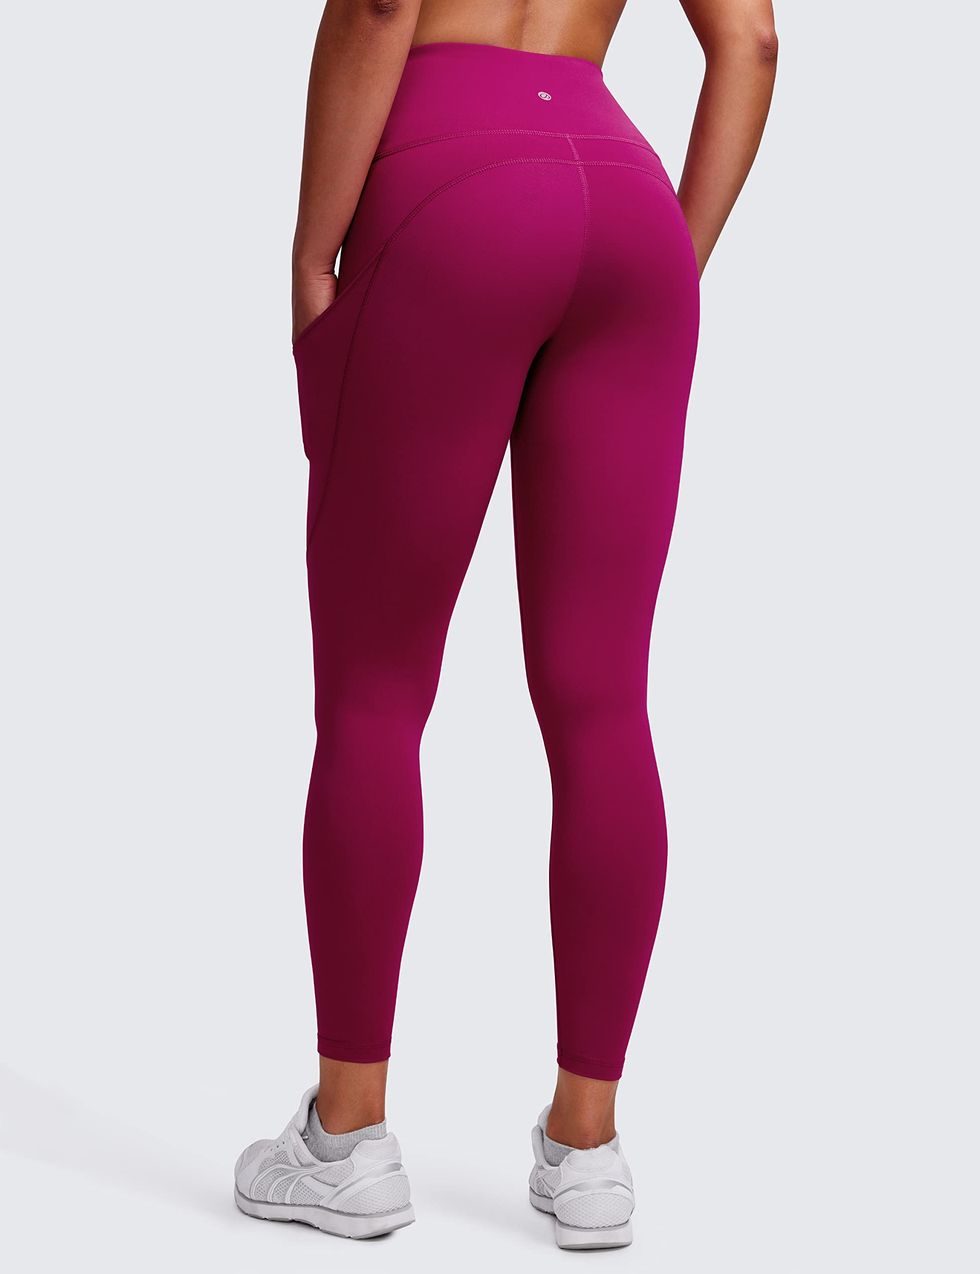 Women's Ulti-Dry Workout Leggings Casual Summer Pull On Stretch